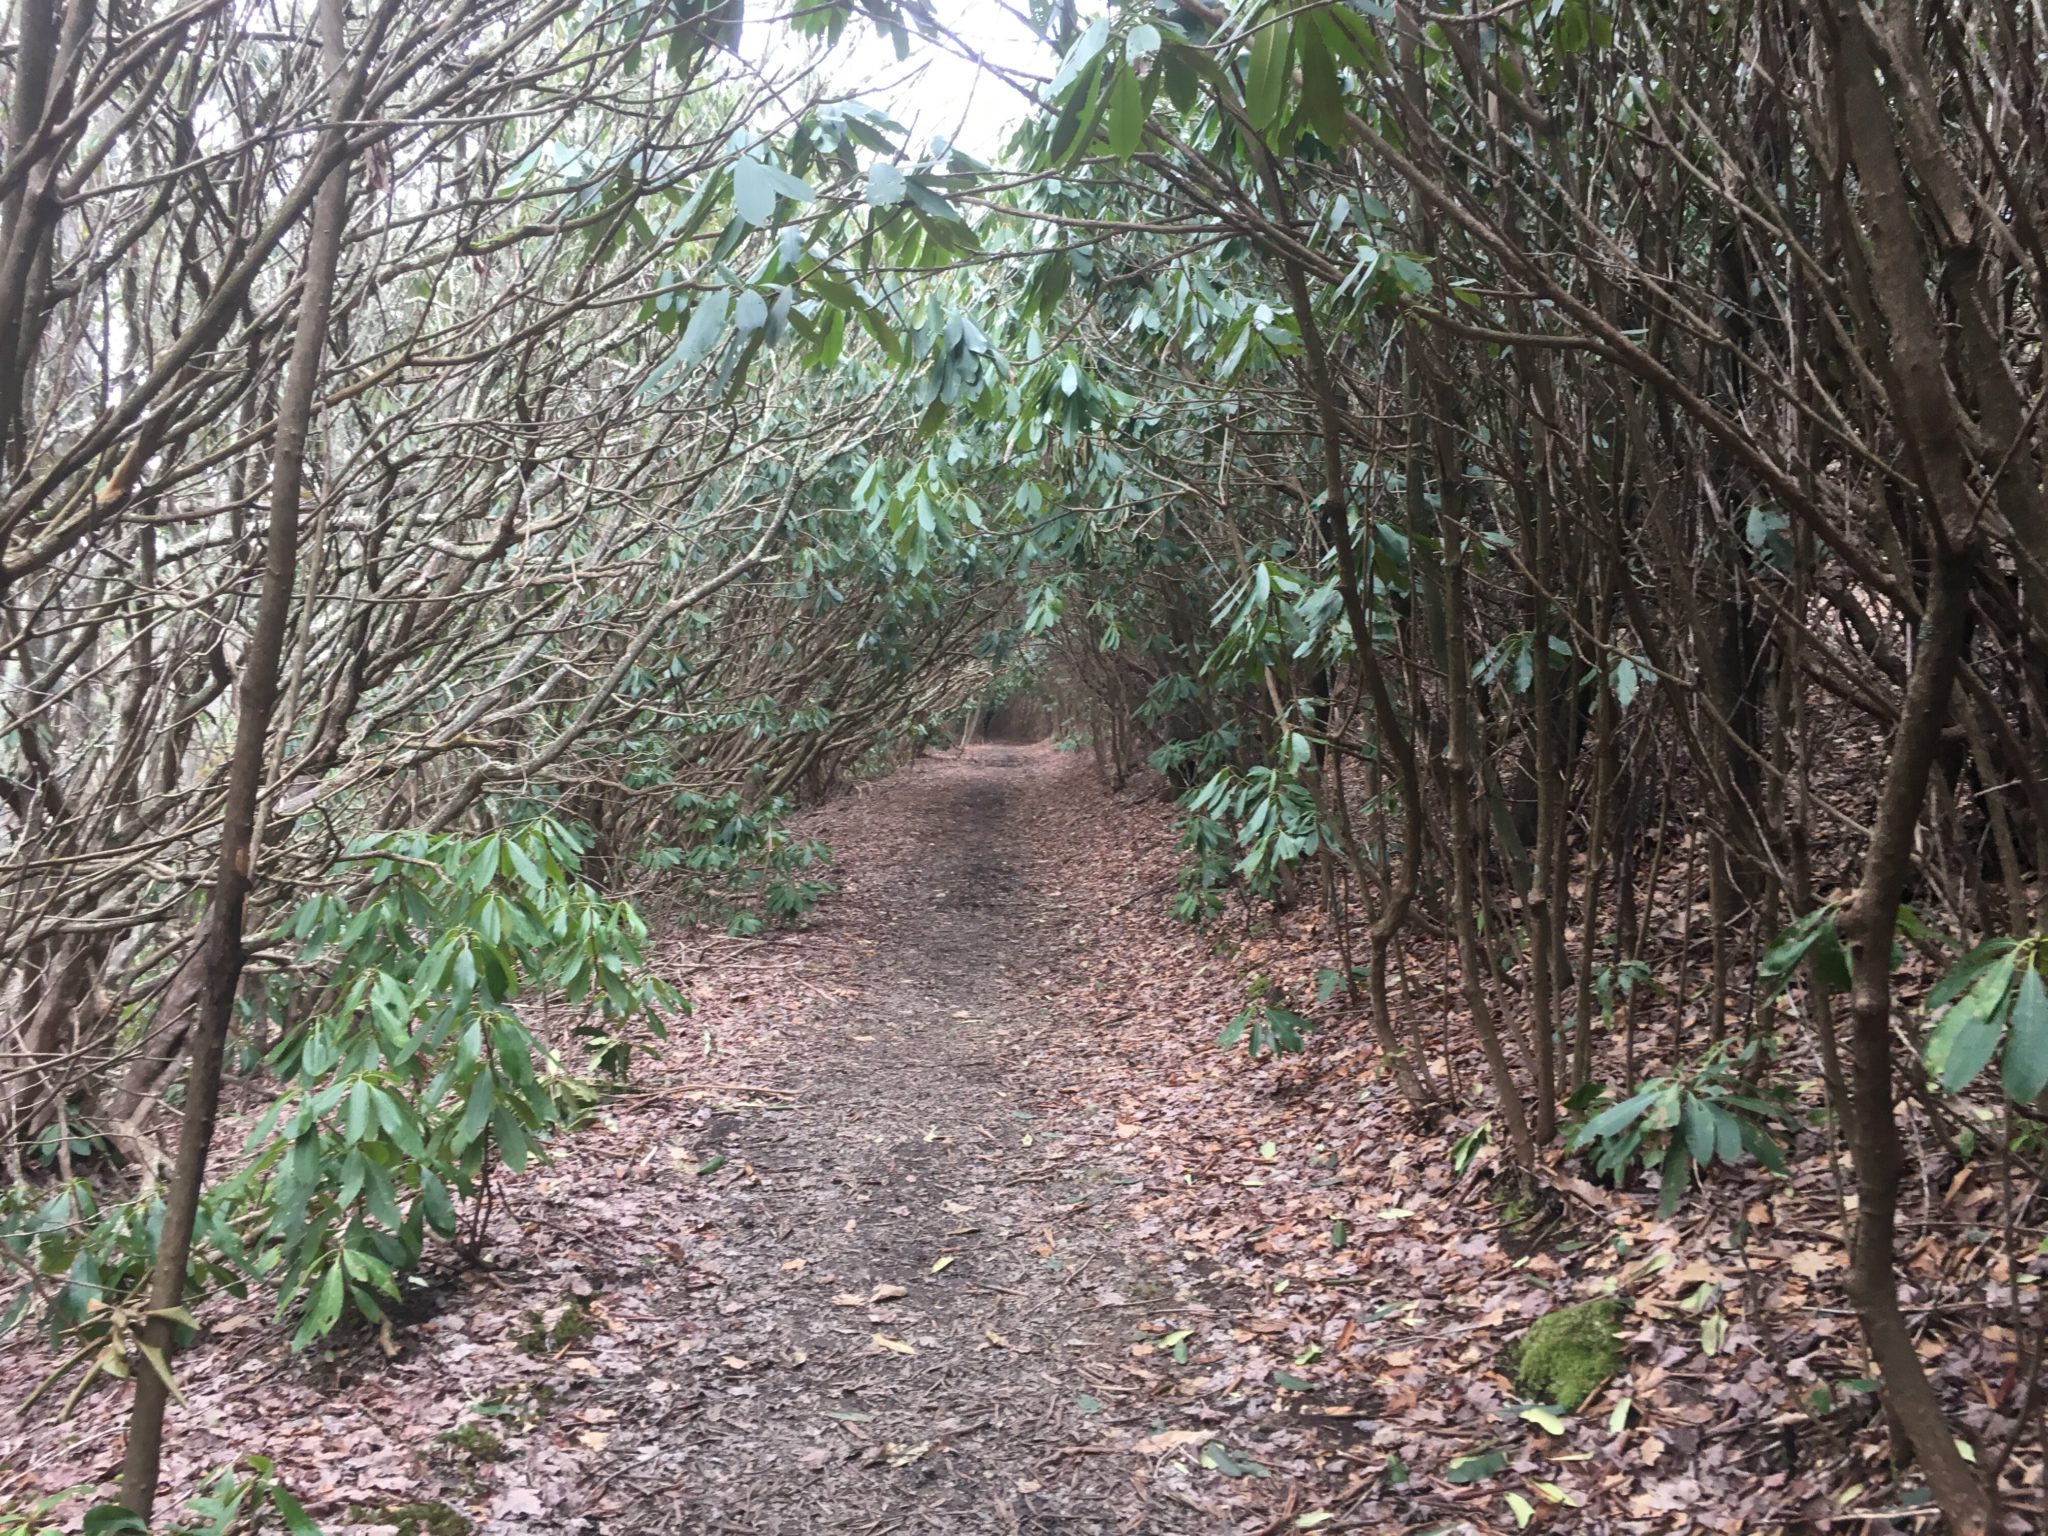 Tunnel of rhododendrons